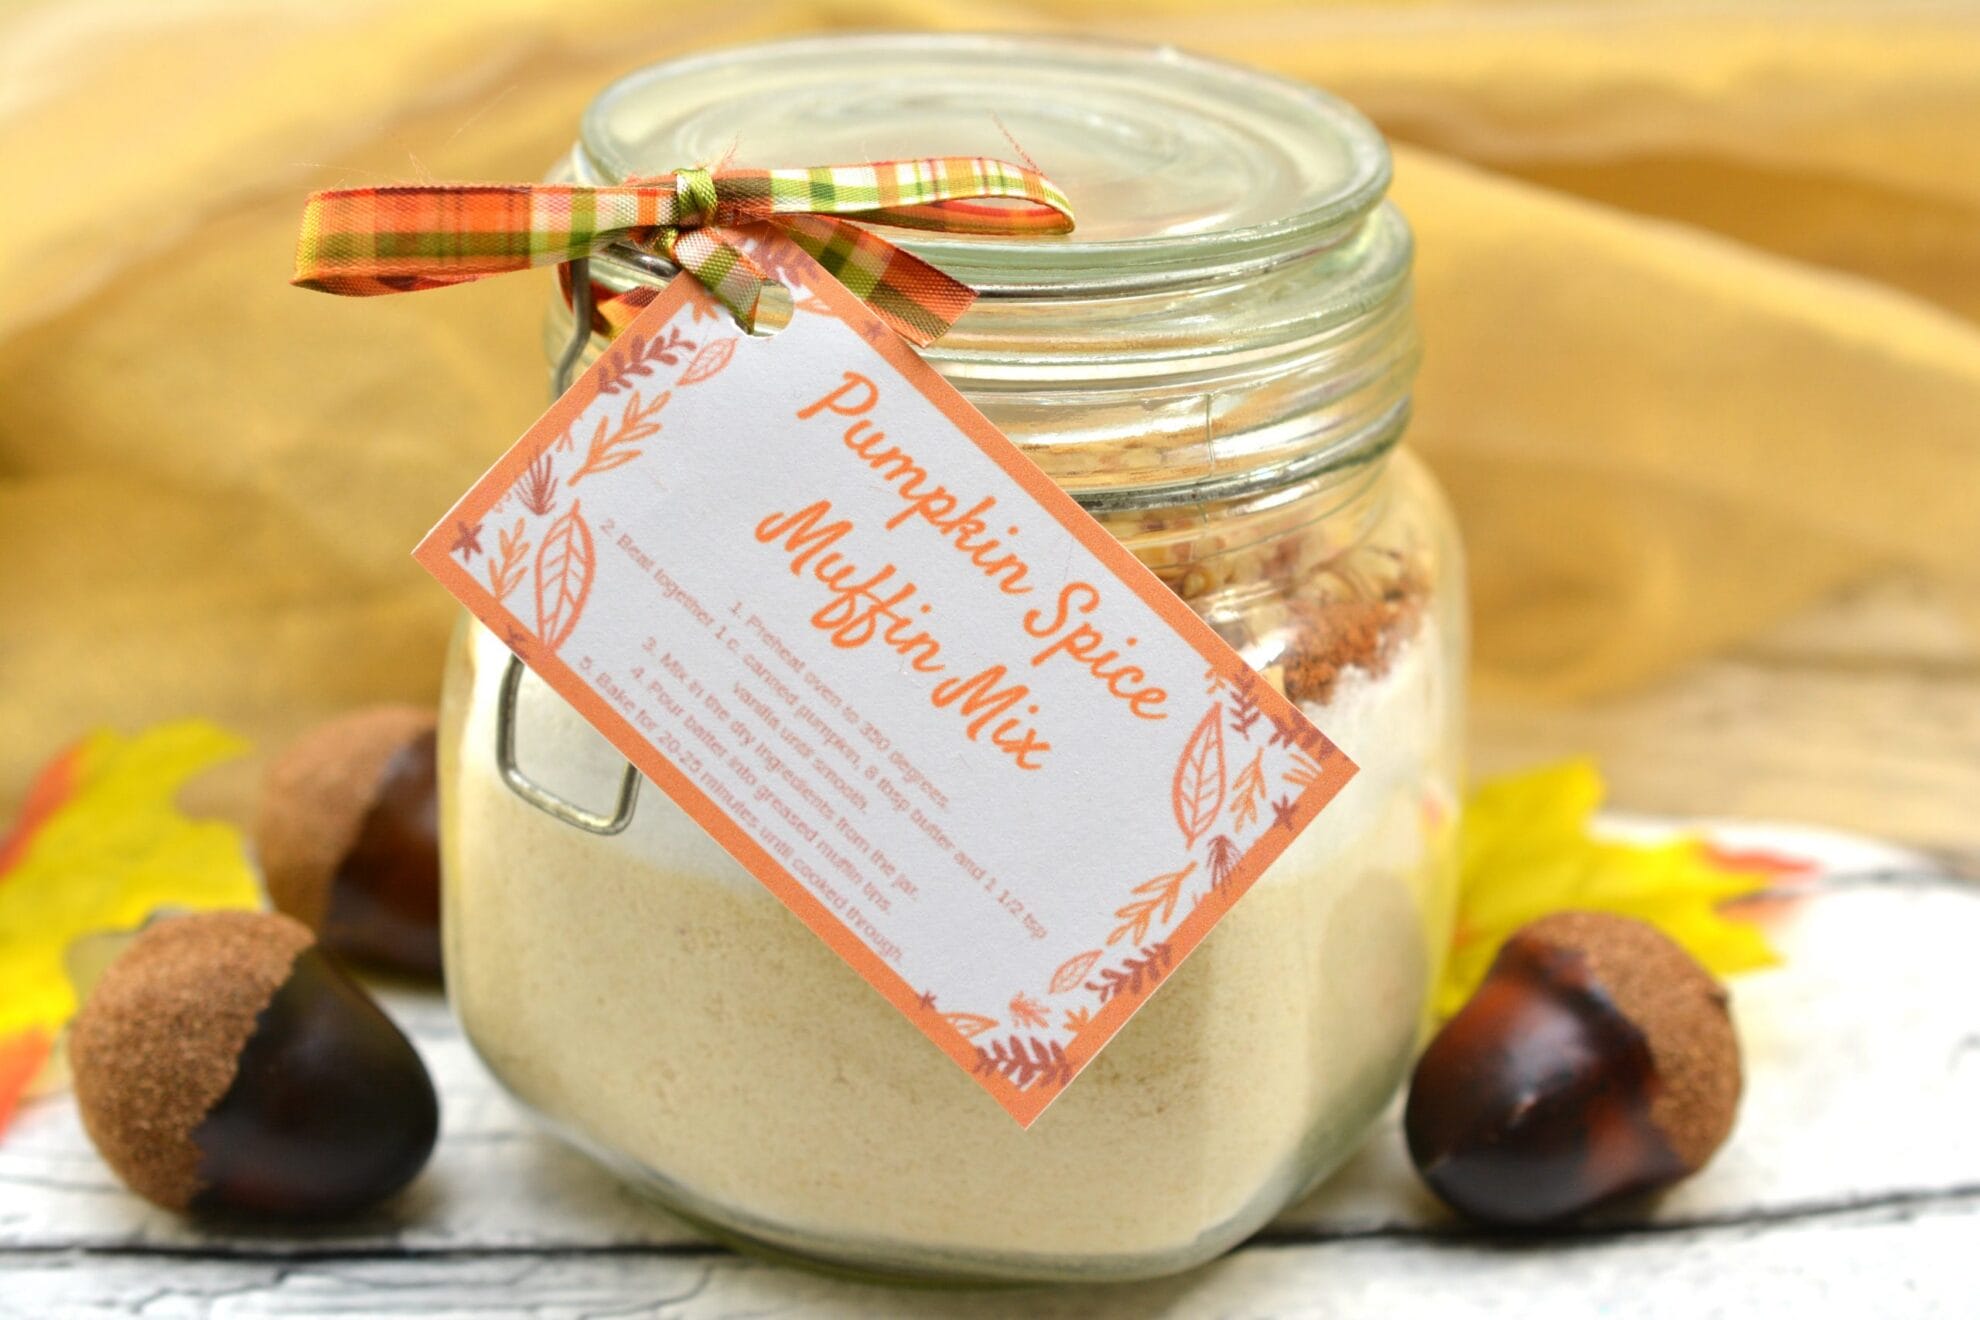 Looking for a great gift in a jar? This Keto Pumpkin Spice Muffin Mix is a great idea. Even people who are not on the Keto diet will love how easy these muffins are to make.